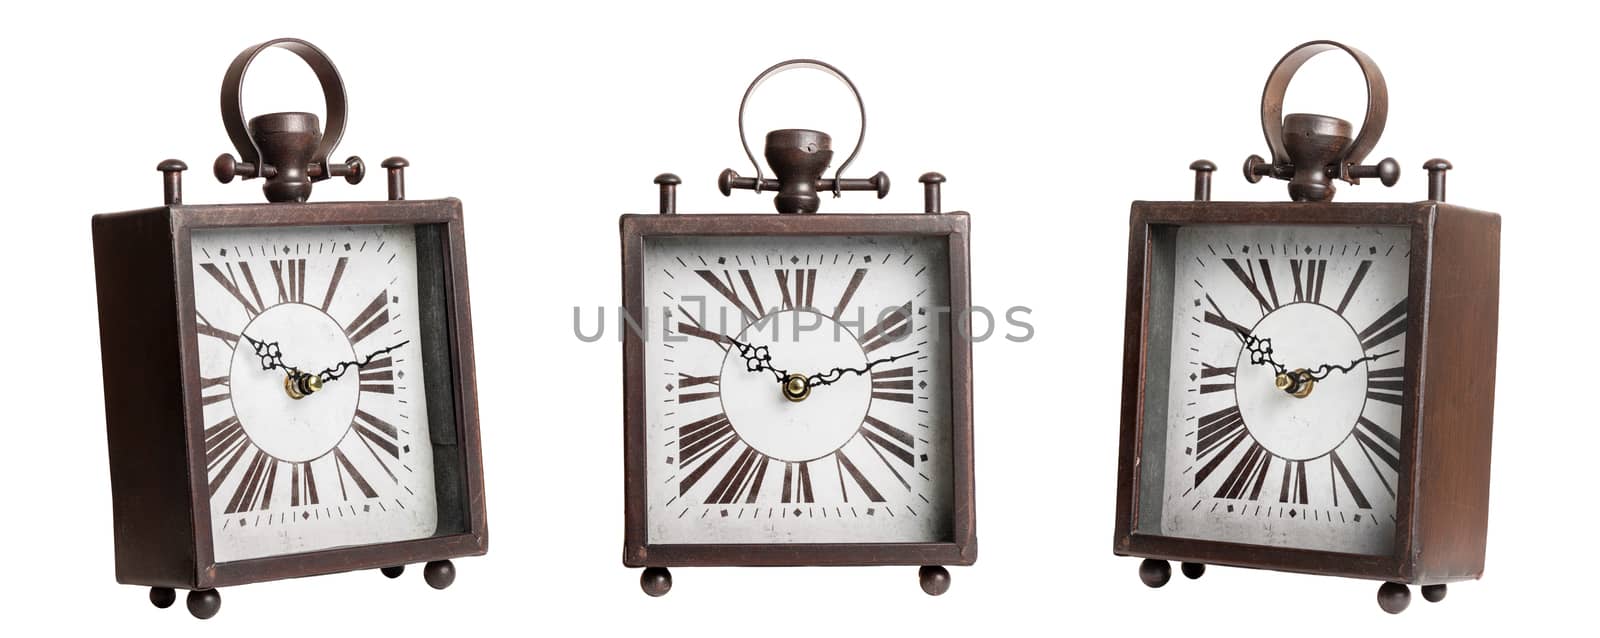 vintage style of desktop clock isolated on white background